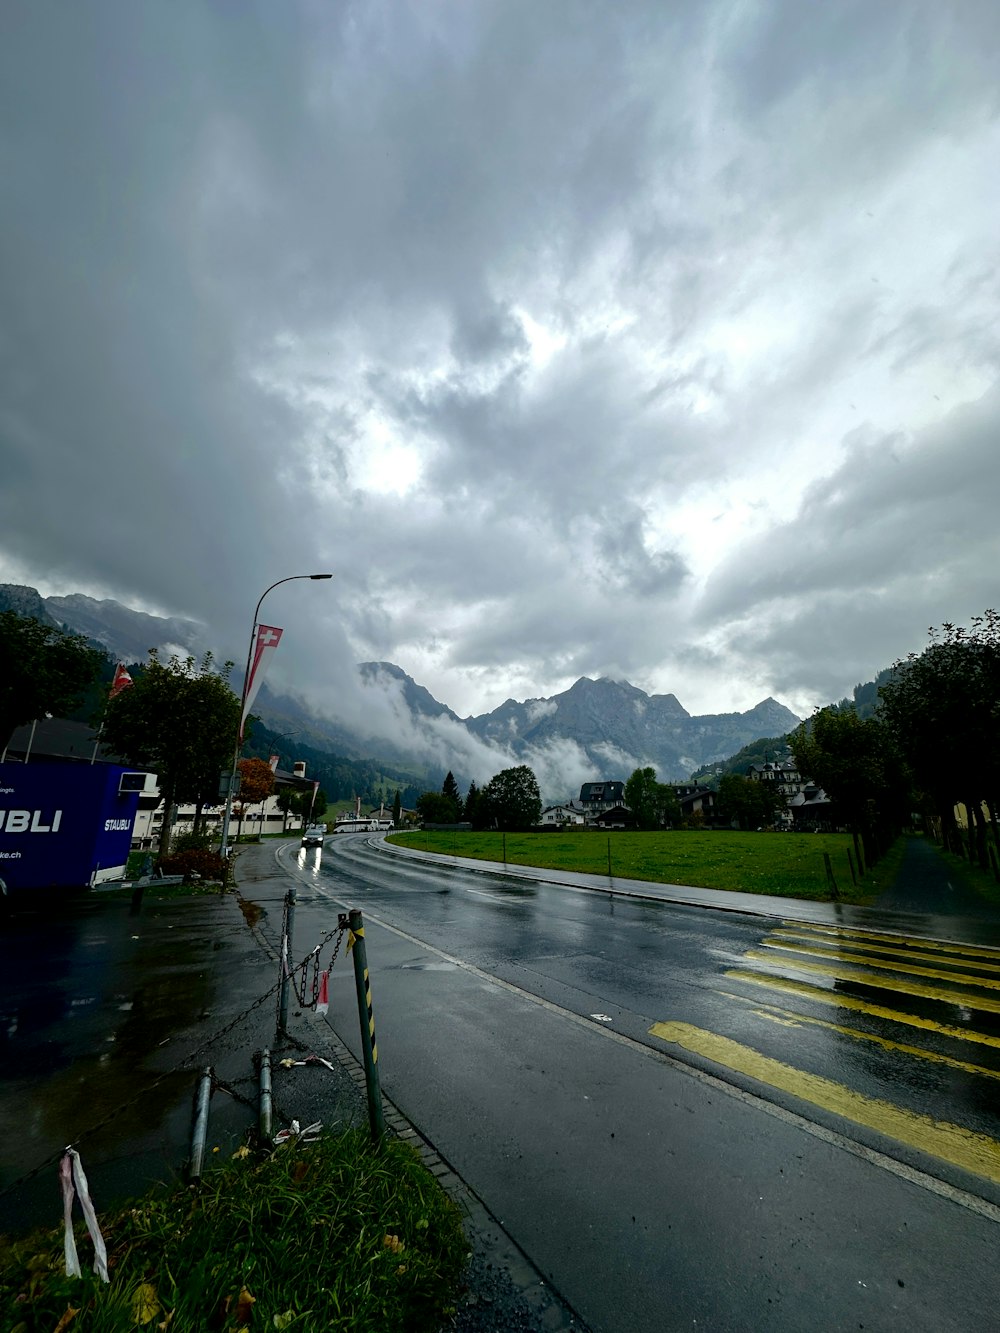 a wet street with mountains in the background